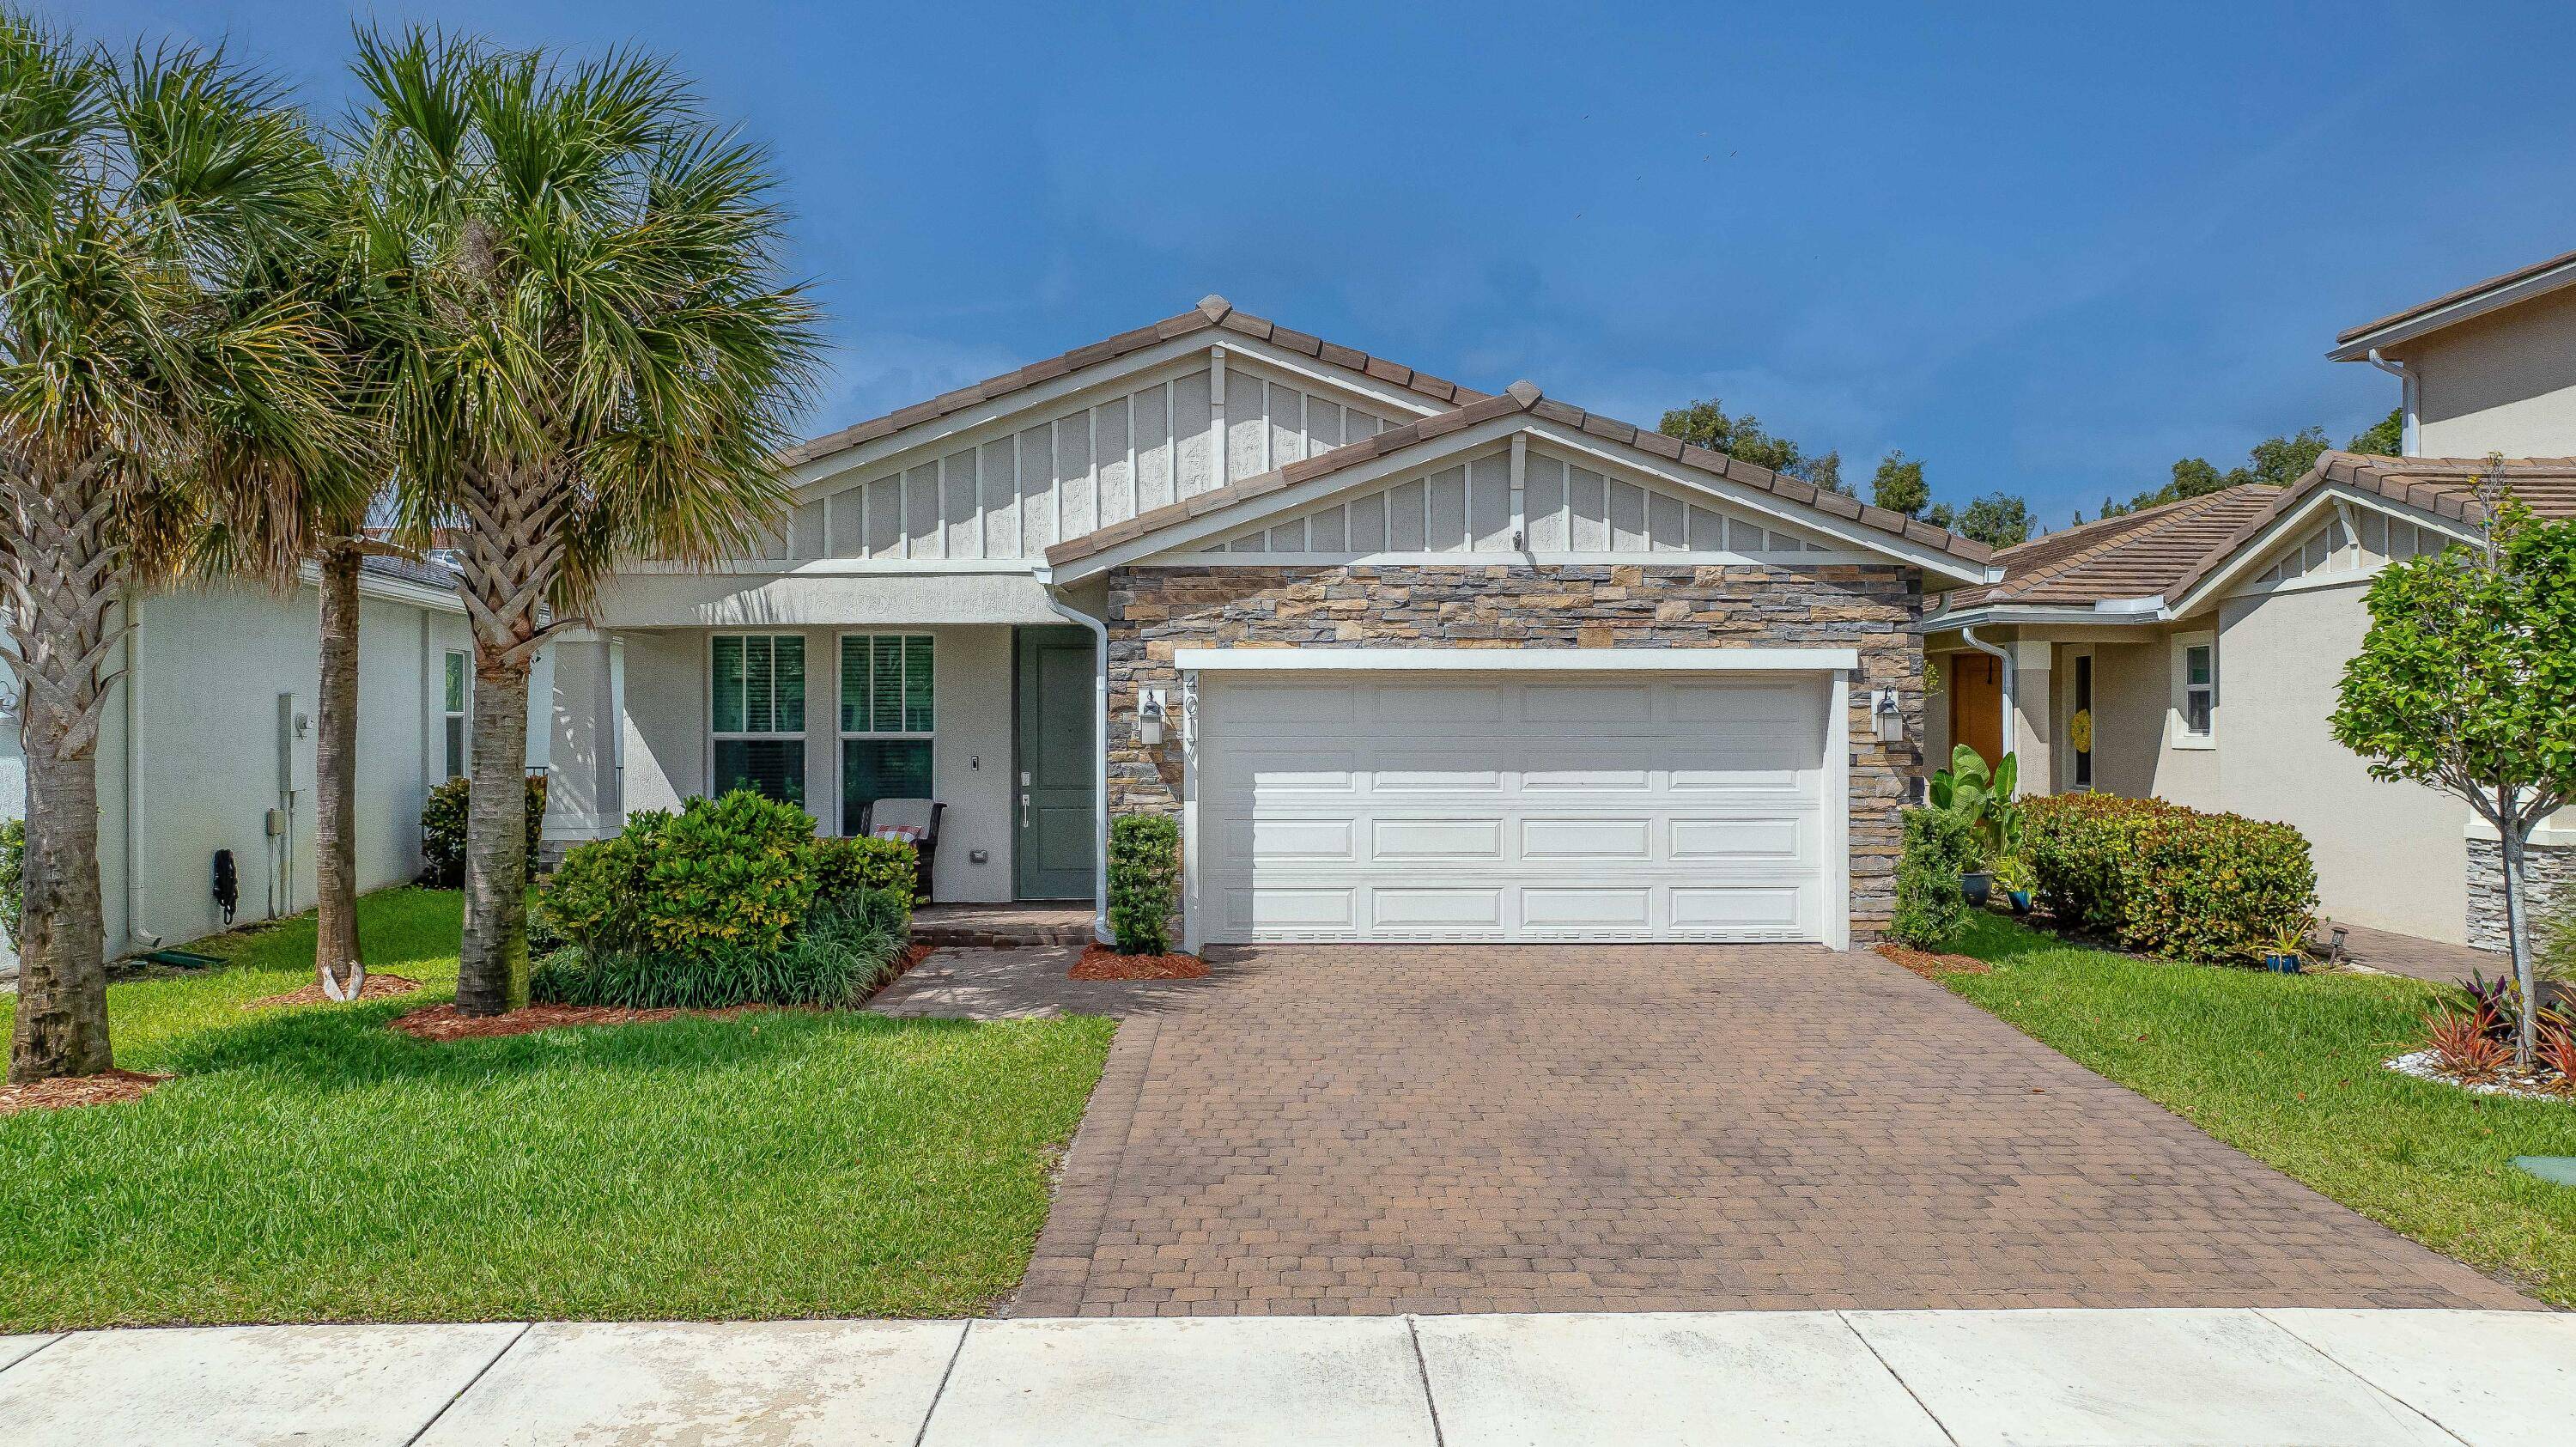 Nestled in highly desirable gated community of Veleiros at Crystal Lake, thiselegant beautifully decorated turnkey 2BR DEN BONUS ROOM 2 bath 2 cargarage boasts a spacious floor plan and an ...